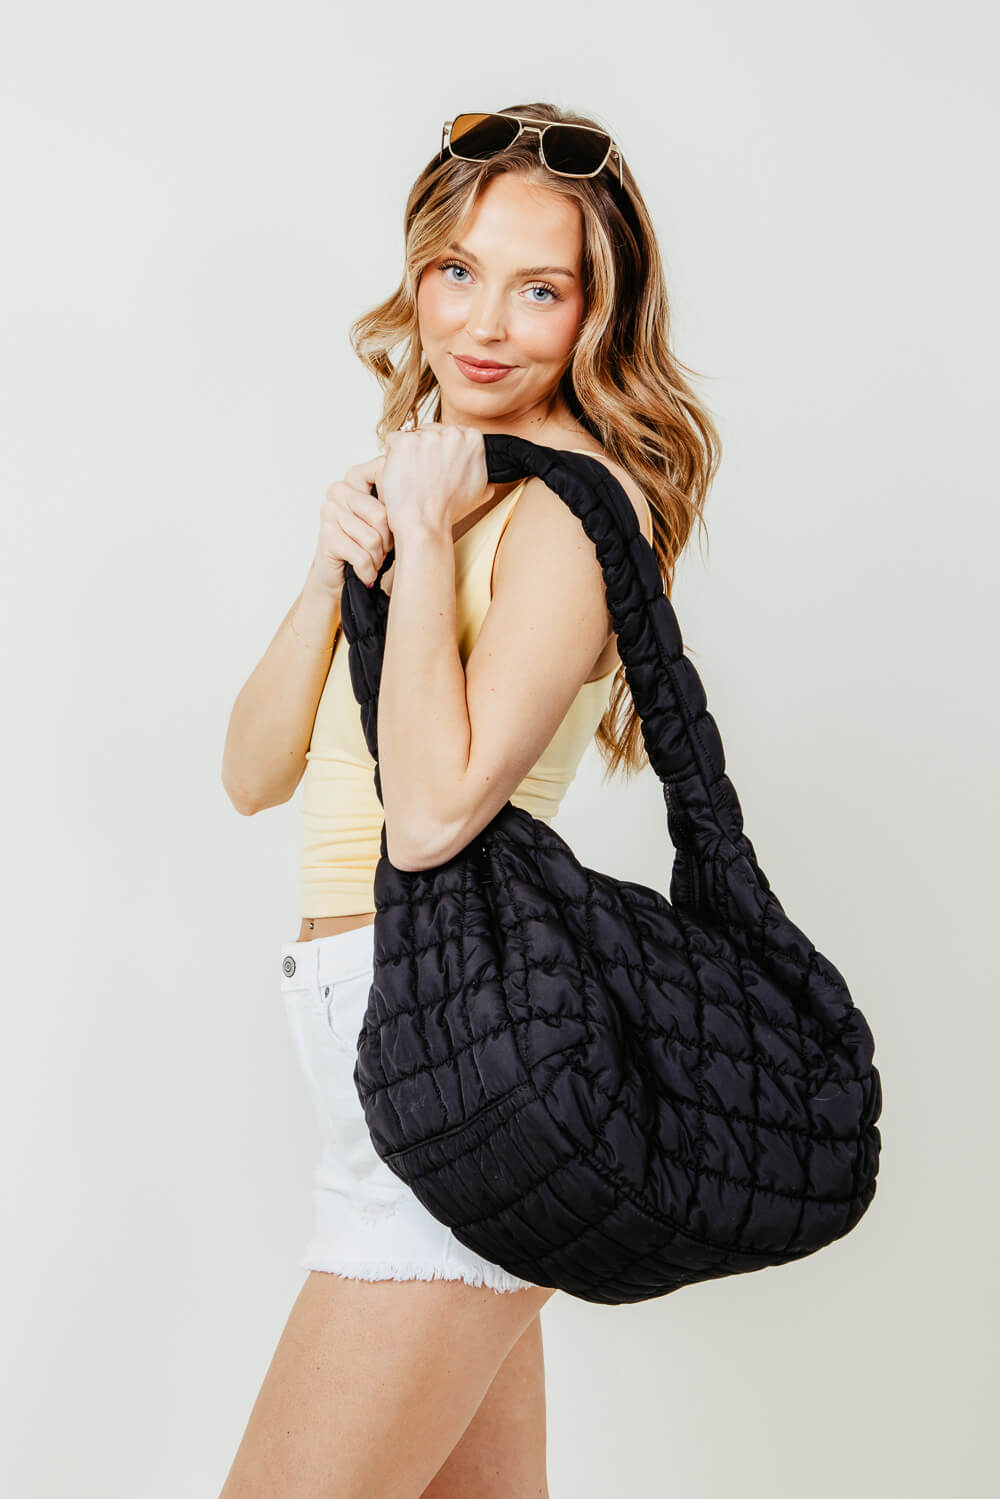 YFGBCX Puffer Tote Bag for Women Quilted Puffy Handbag India | Ubuy